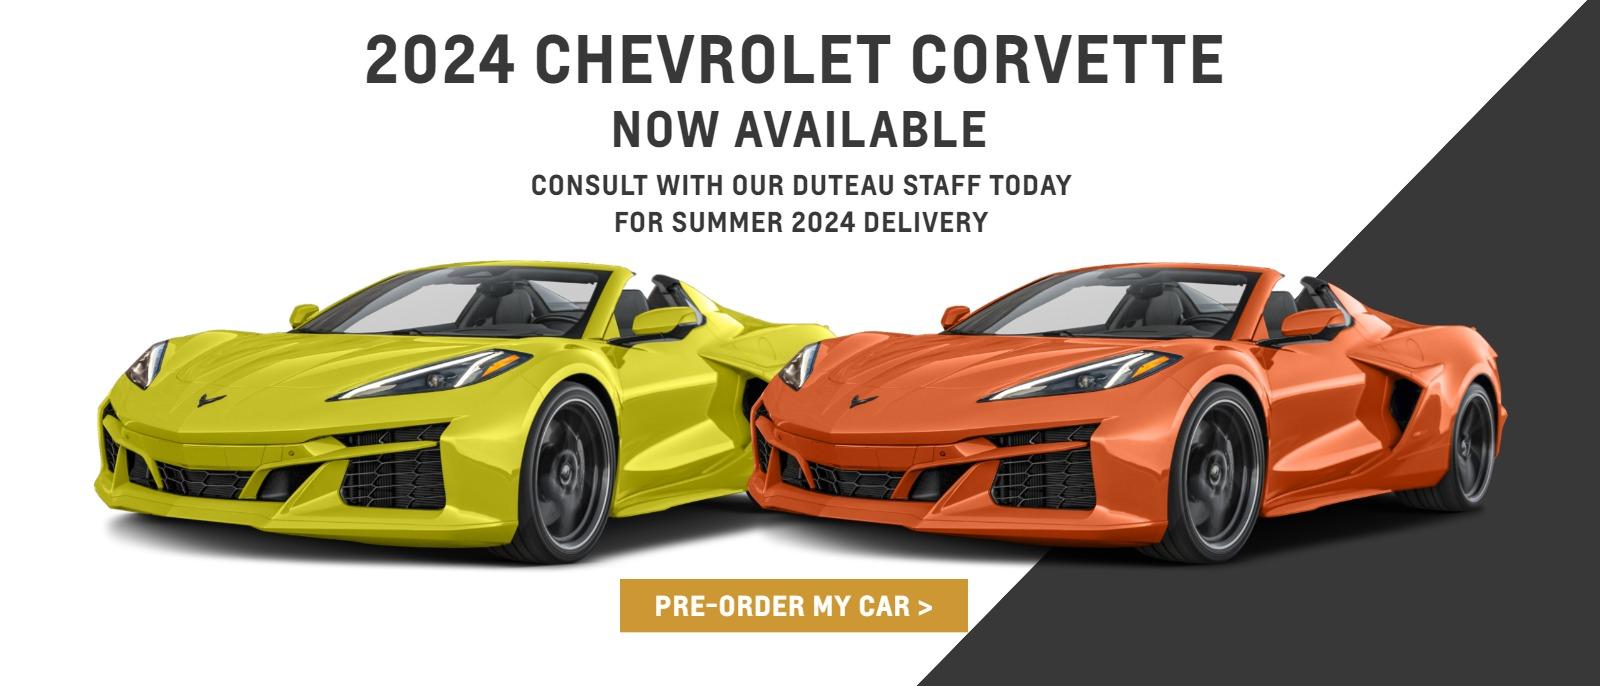 2024 Chevrolet Corvette Consult with our DeTeau staff today for Summer 2024 delivery
Pre-Order My Car >